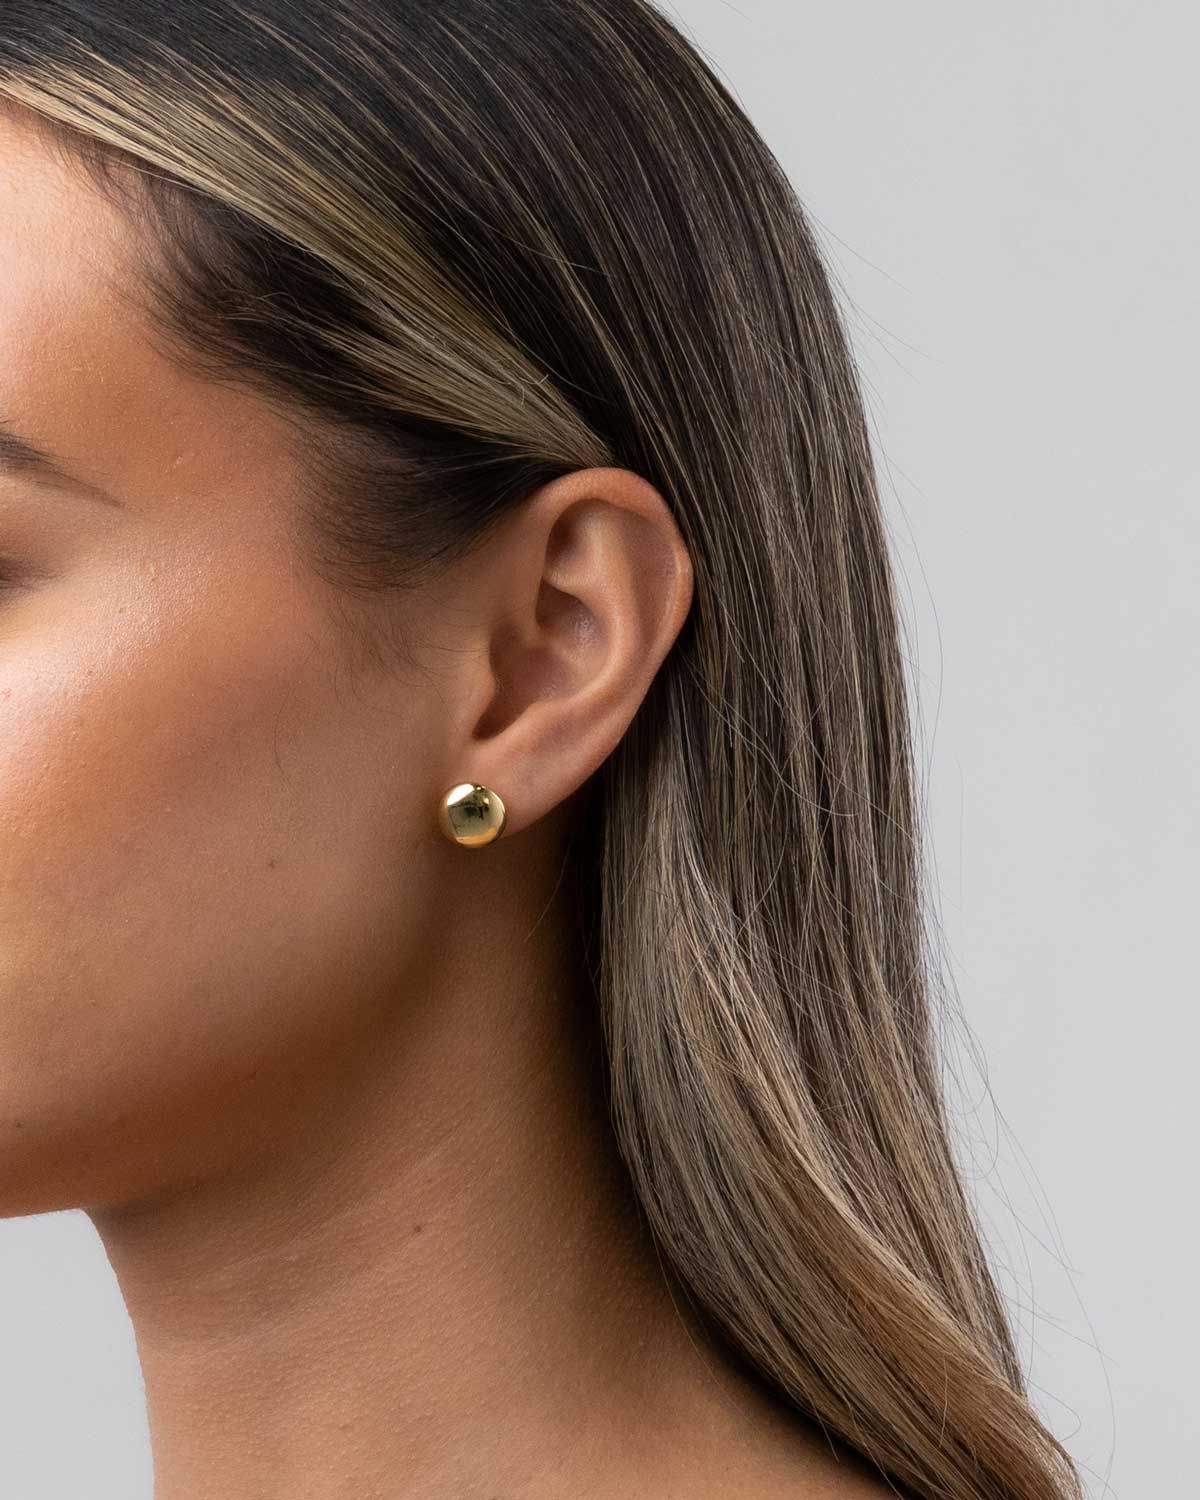 Claude by Claudia button studs in 18 karat yellow gold featured in female models ear.